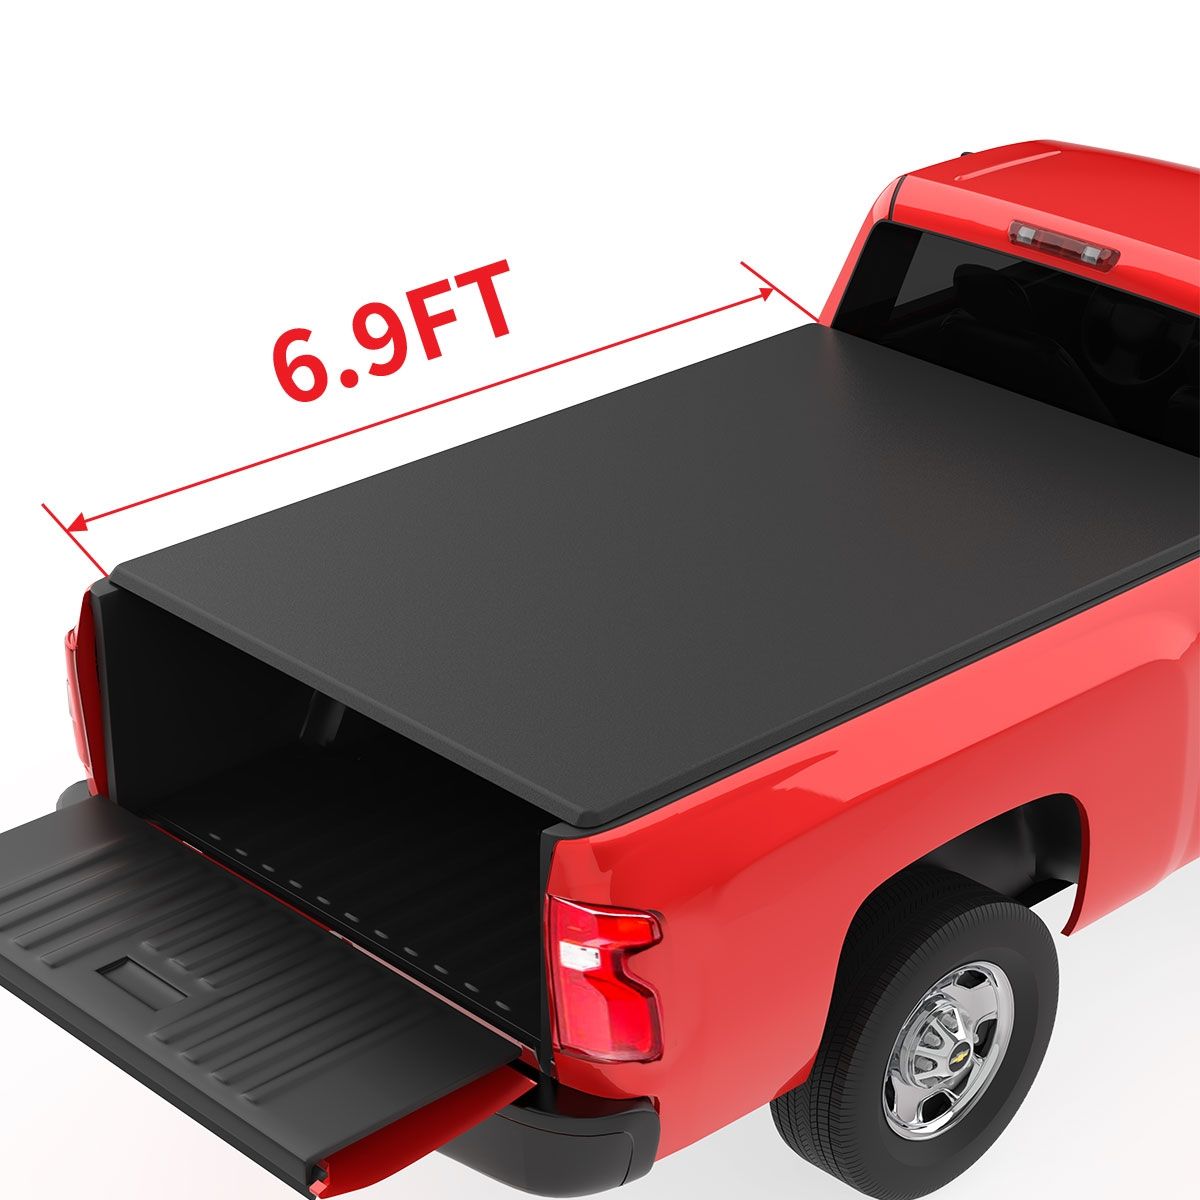 OEDRO? 6.9ft Soft Roll Up Tonneau Cover for 2020-2022 Chevrolet Silverado/GMC Sierra 2500 3500 HD New Body Style